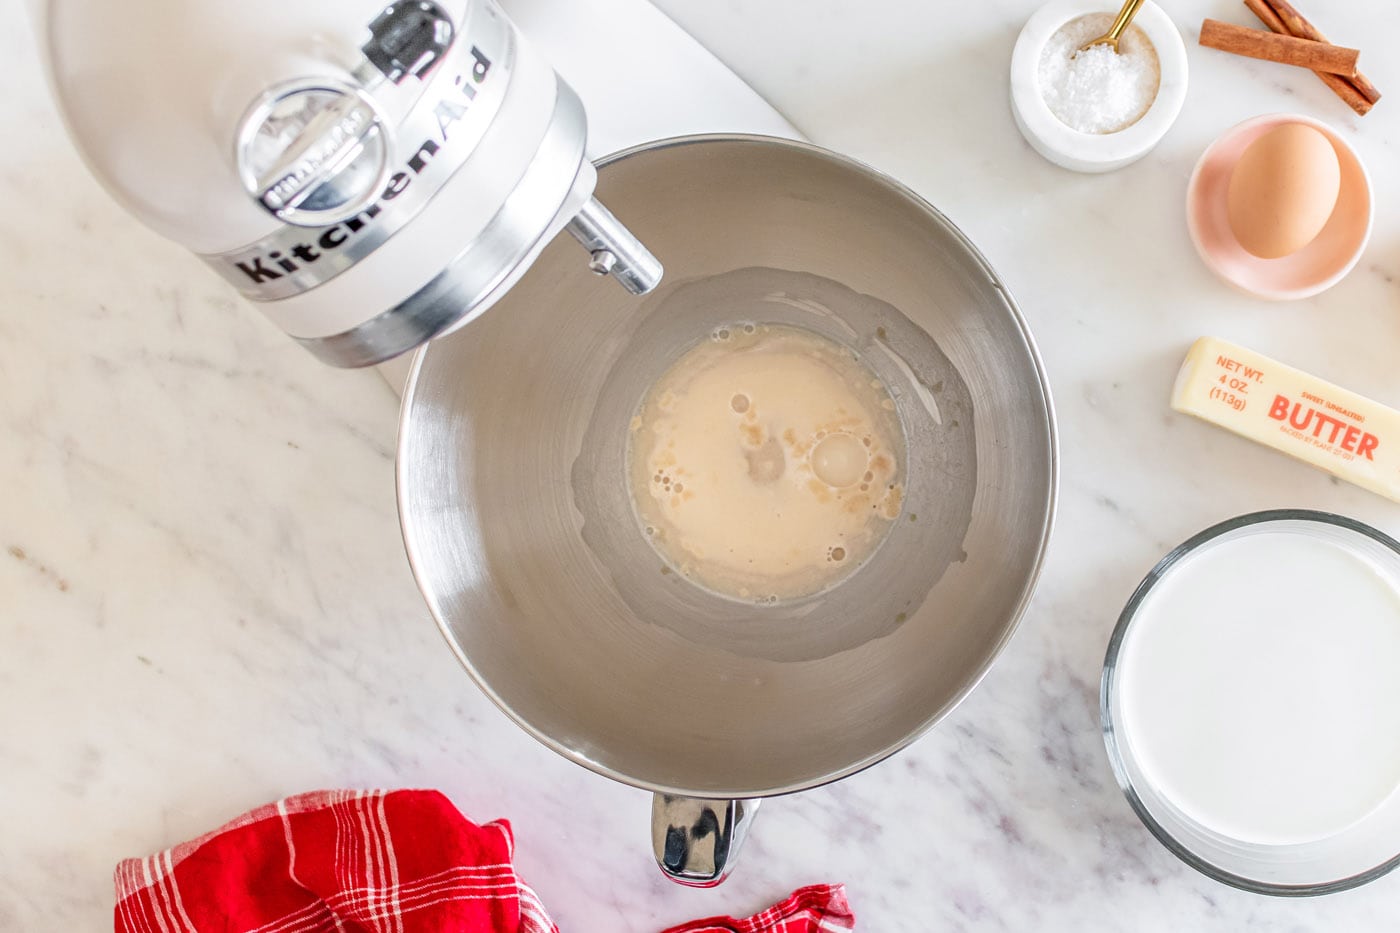 yeast, water, and sugar in a stand mixer bowl